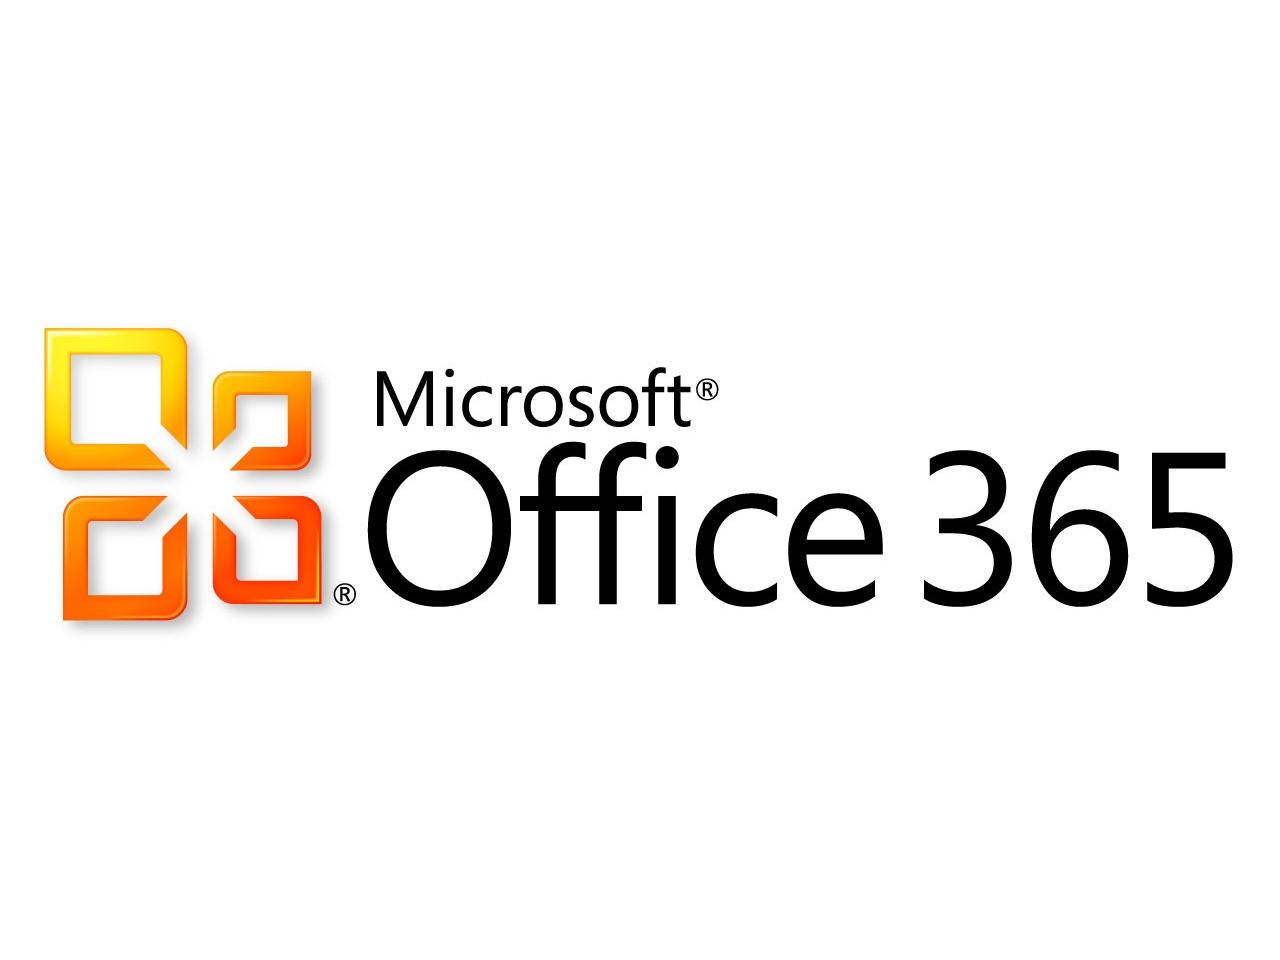 O365 Logo - Must Know Benefits Of Office 365 IT! Anytime